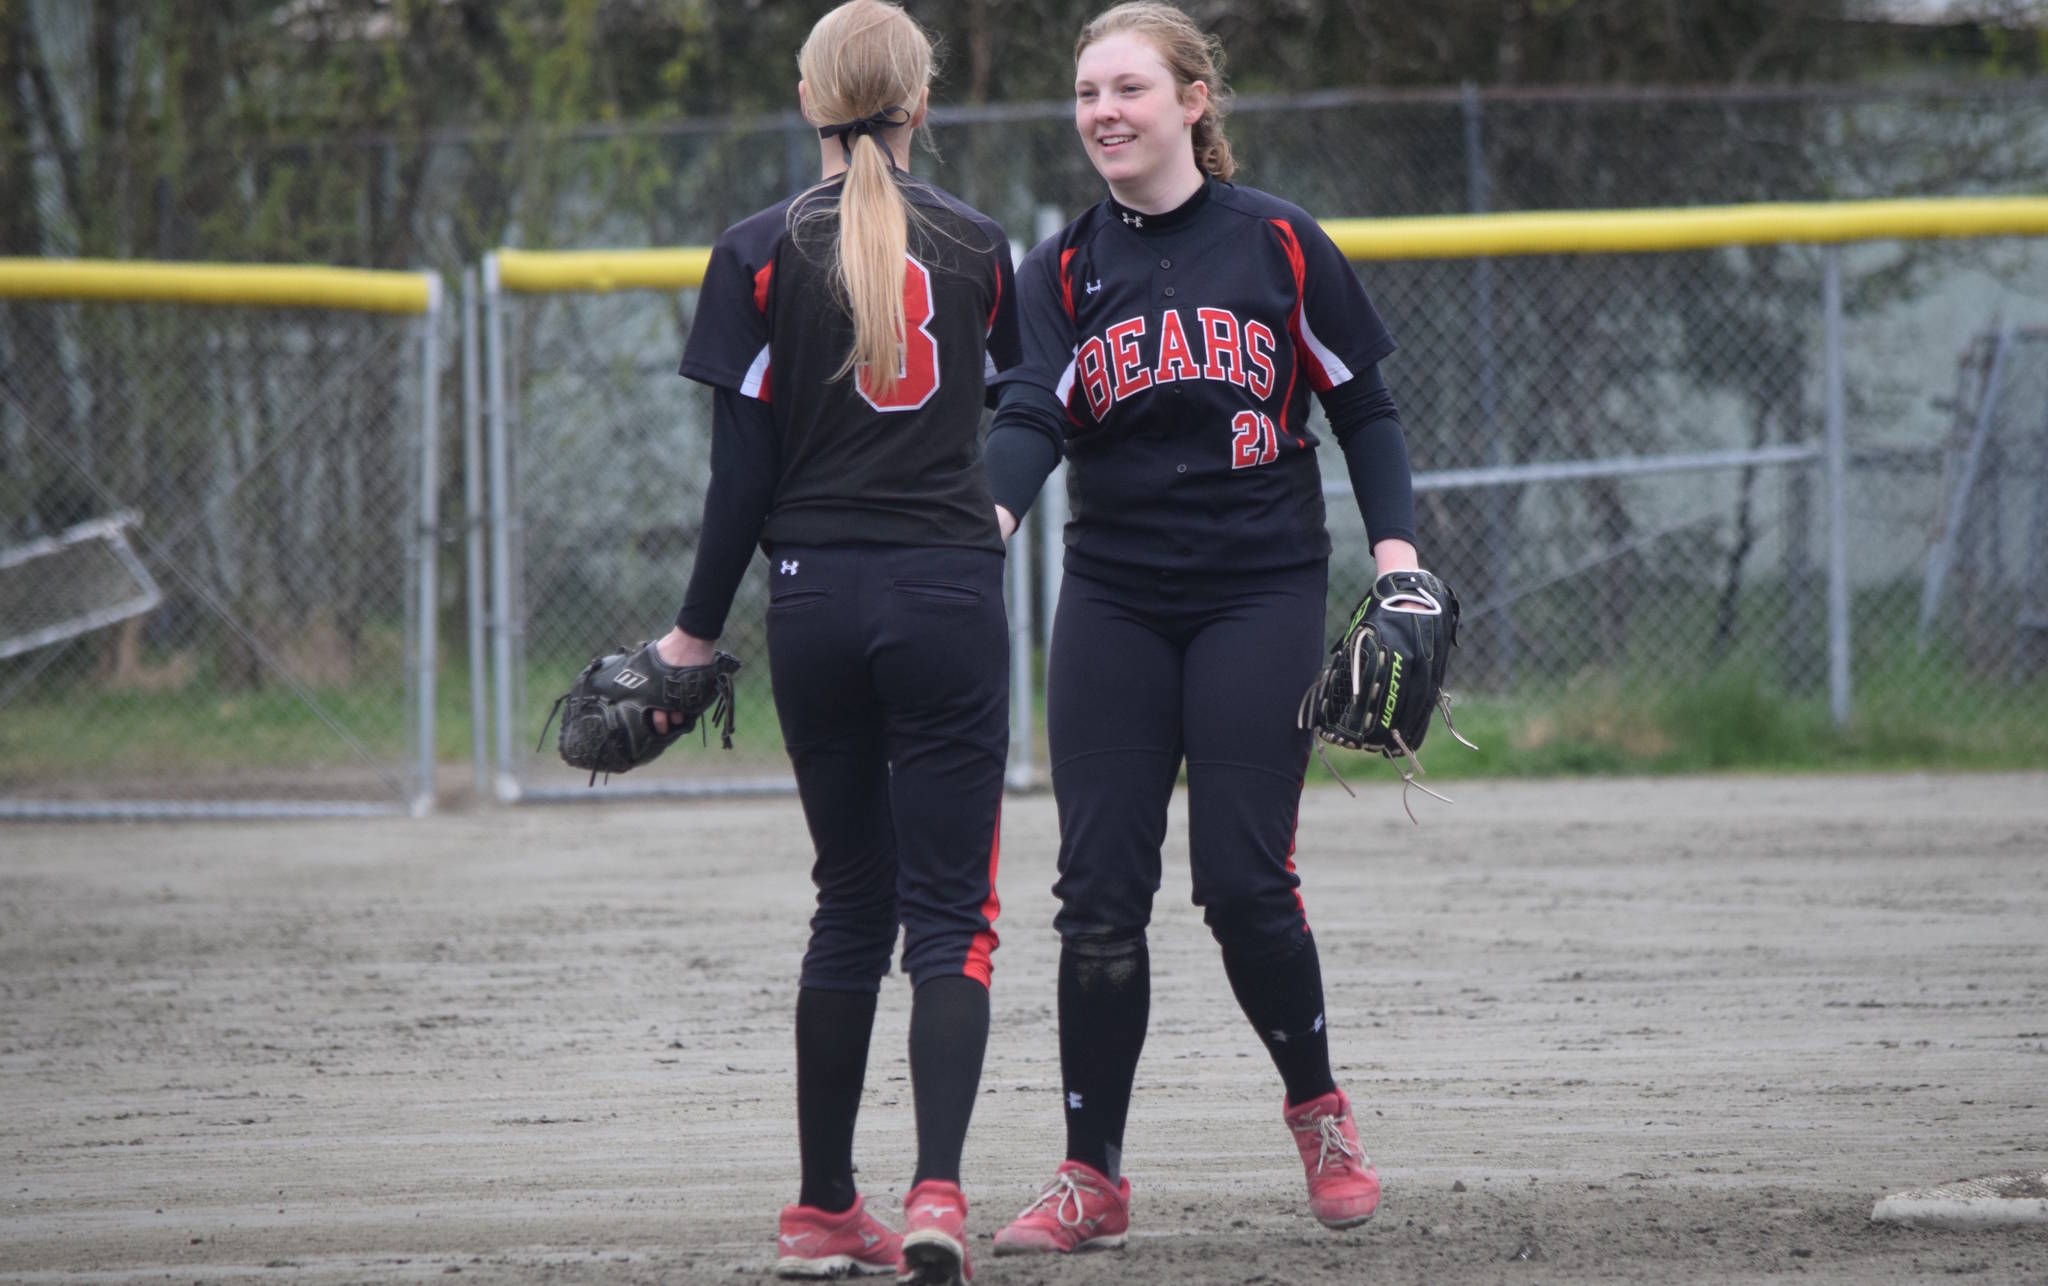 Timely hitting gives JDHS 6-5 win over Ketchikan